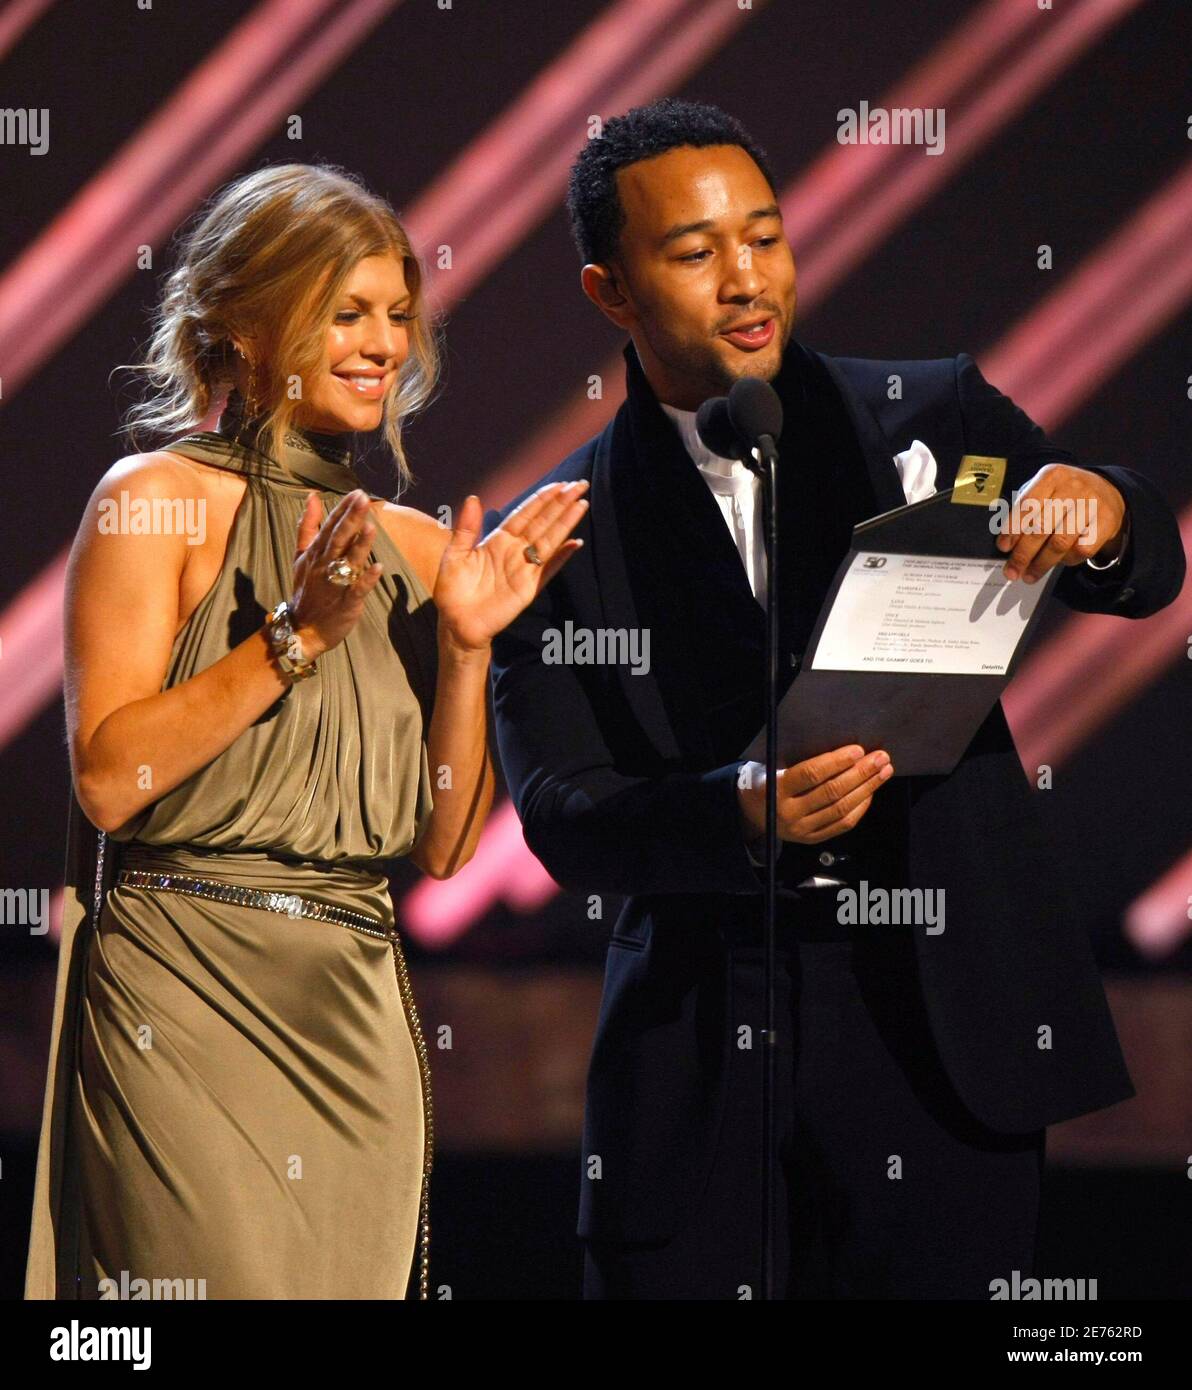 Fergie and John Legend announce the Grammy for the Best Compilation  Soundtrack Album winner as "Love" at the 50th Annual Grammy Awards held in  Los Angeles, California February 10, 2008. REUTERS/Mike Blake (